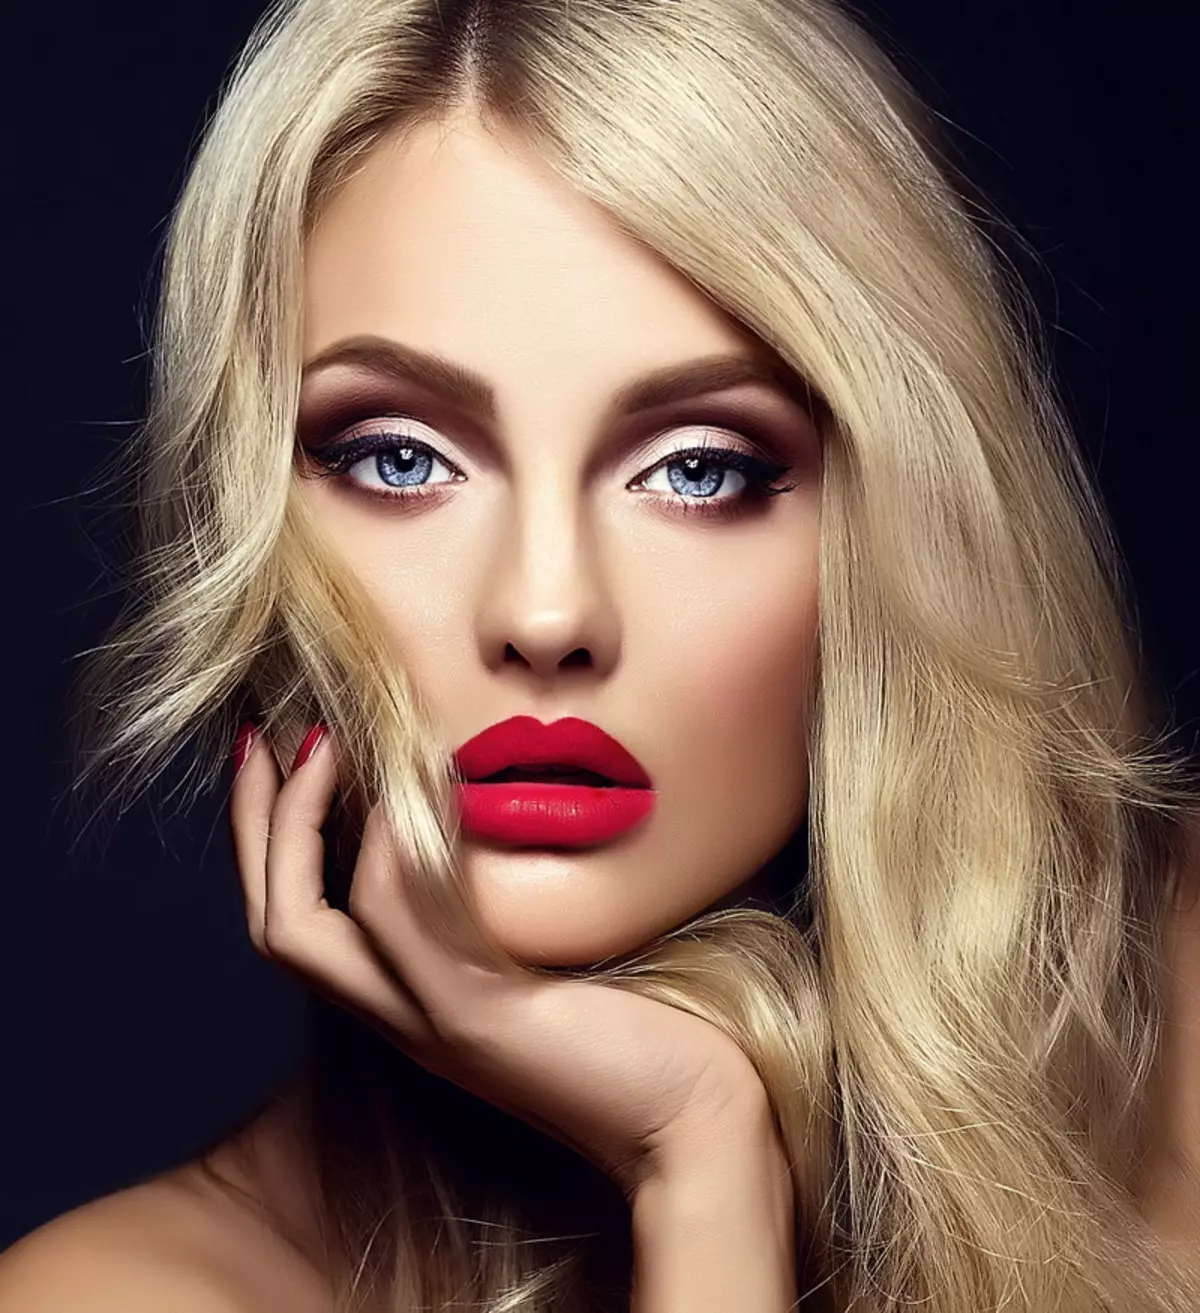 Makeup for blondes (81 photos): with blue eyes and gray, green and karium. Daytime beautiful makeup for light skin and evening with red lips, other ideas 16101_32